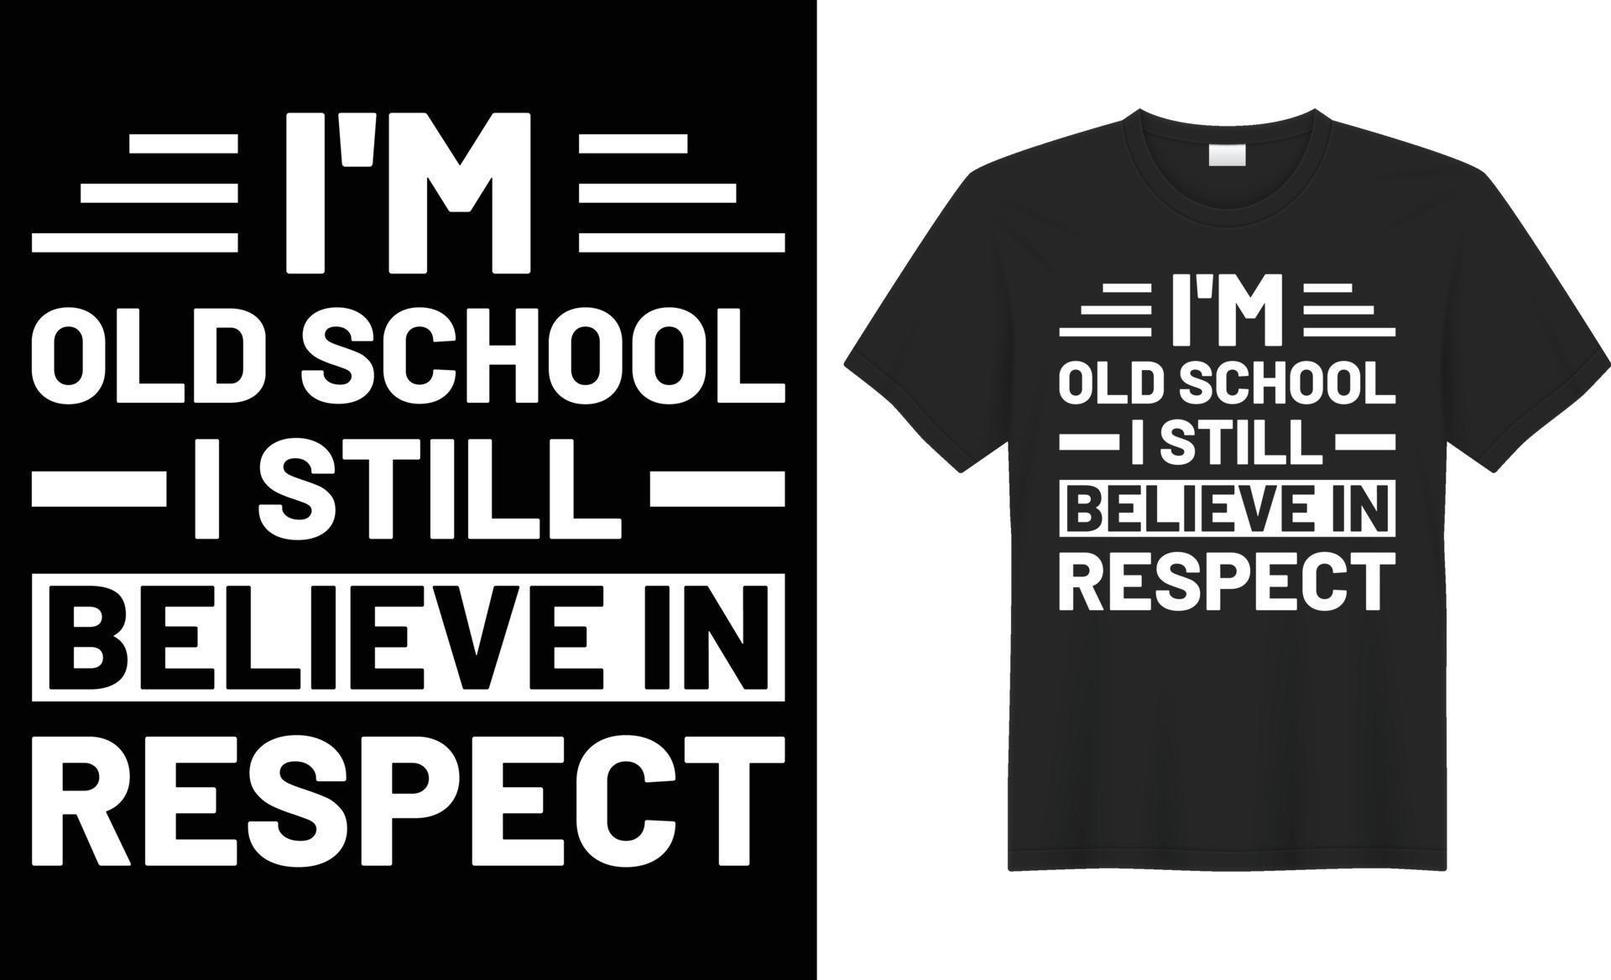 I-m old school i still believe in respect typography vector t-shirt design. Perfect for print items and bags, template, poster, banner. Handwritten vector illustration. Isolated on black background.